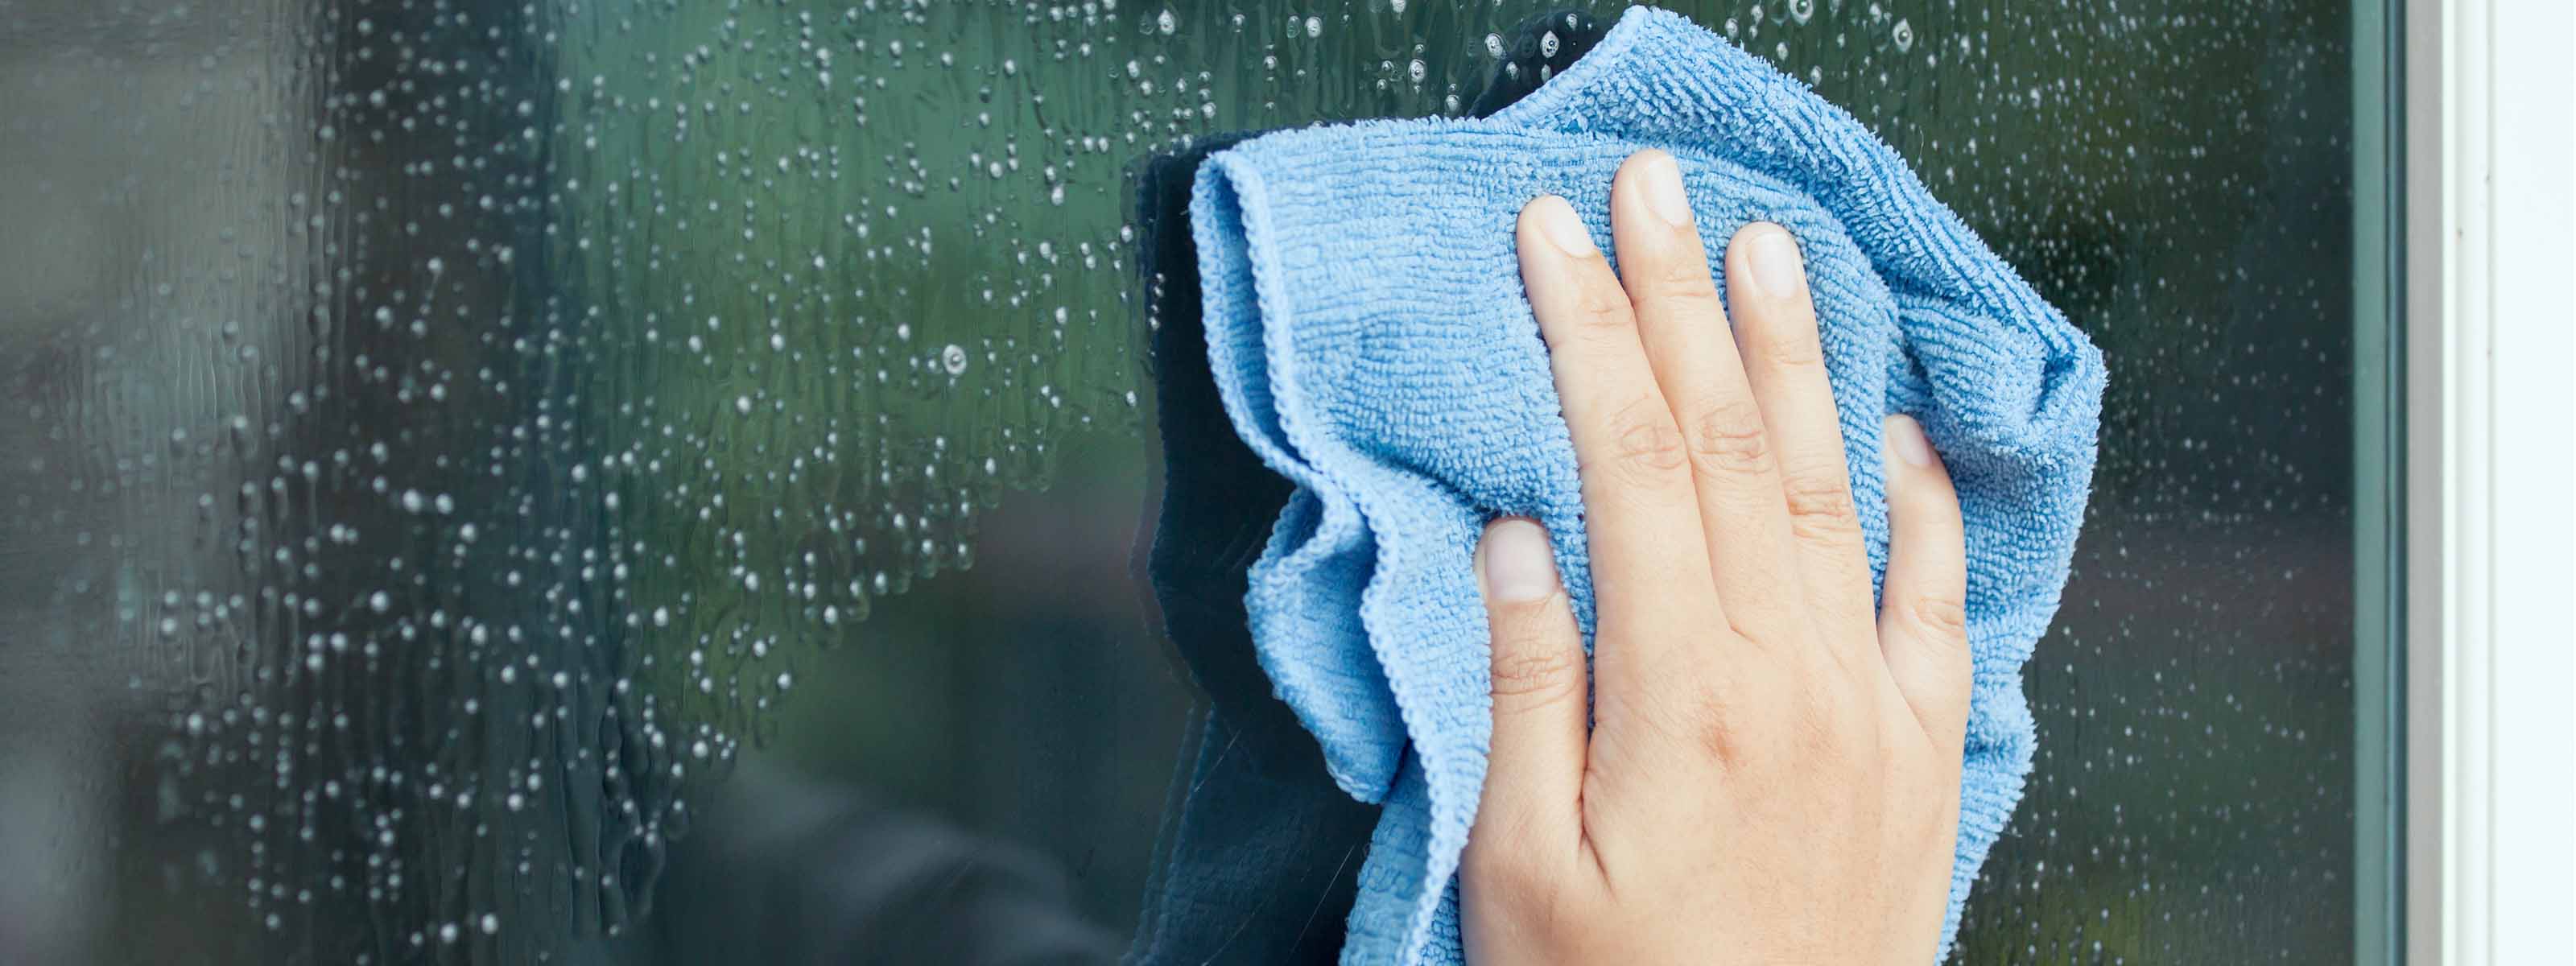 Hand Wiping Window with Soapy Water